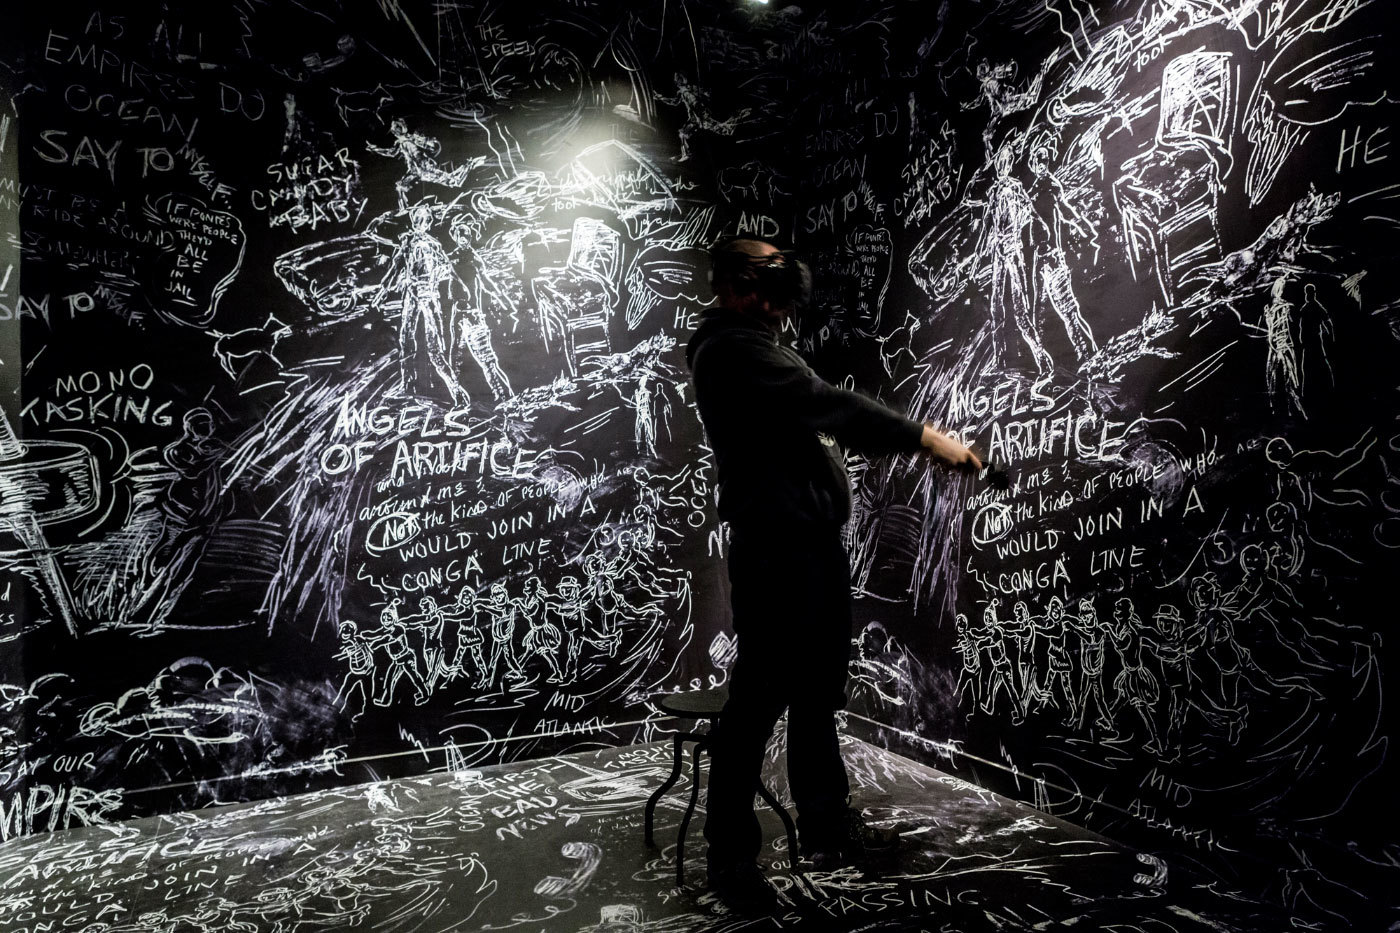 Visitor experiencing Chalkroom, by Laurie Andersoon and Hsin-Chien Huang